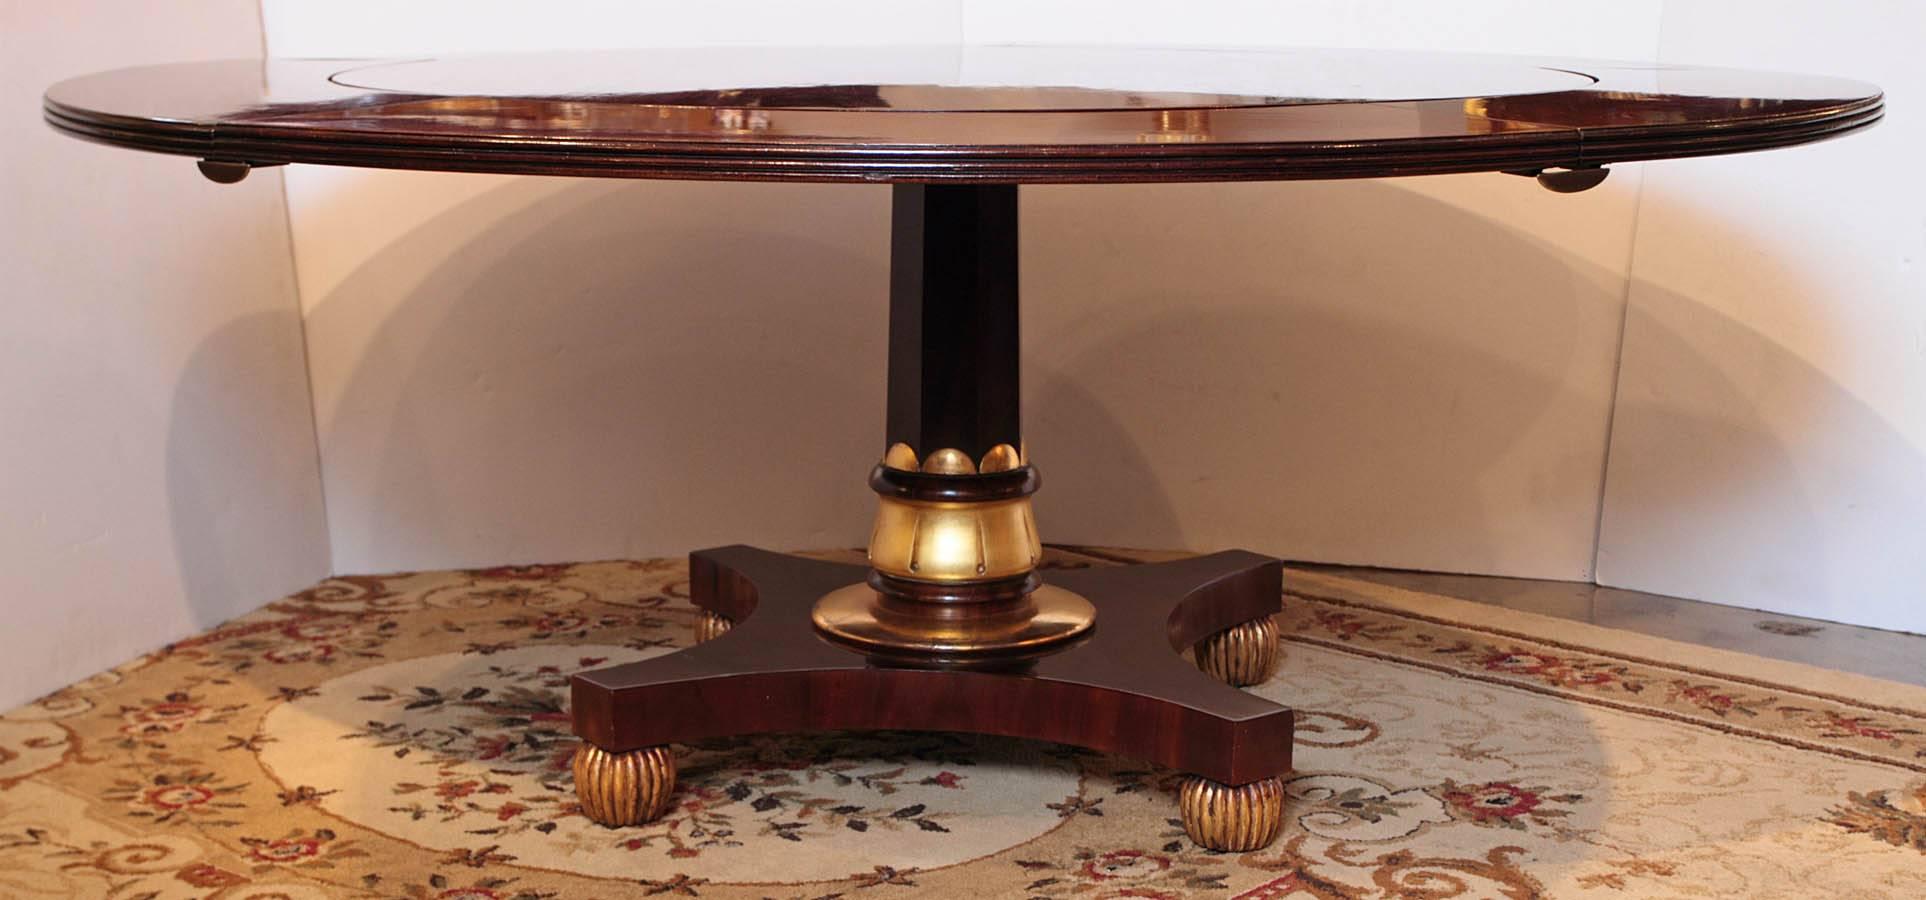 19th century Regency mahogany and parcel-gilt dining table. Original extension leaves.